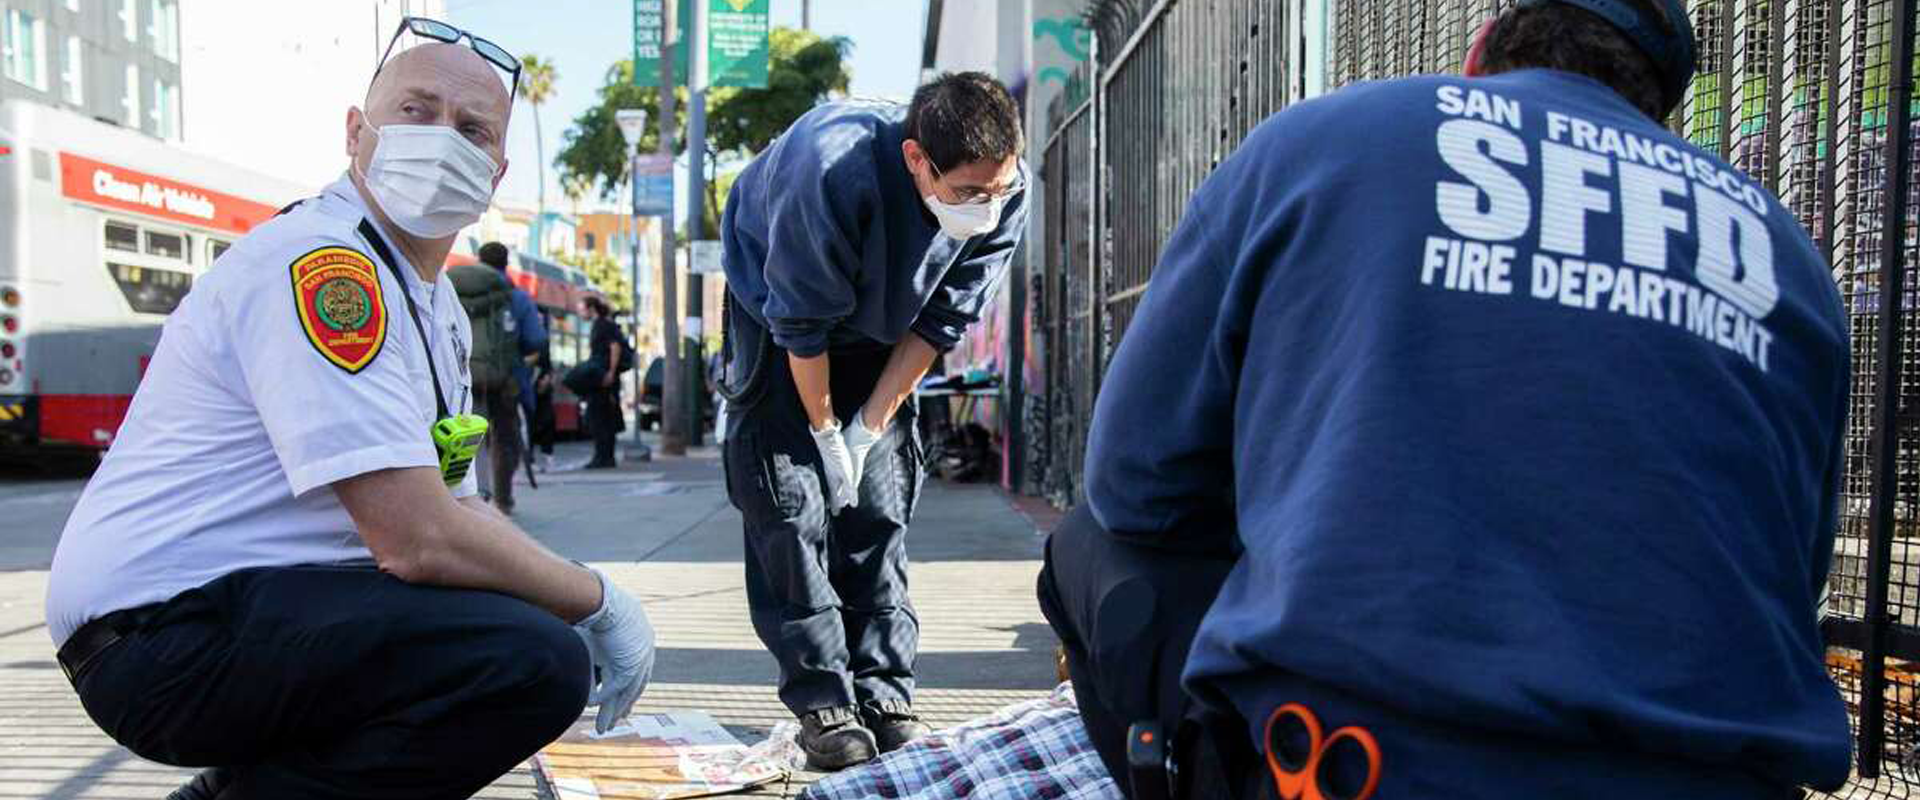 Photo illustrating the International Crisis Response Association's focus: San Franscisco Crisis Response Team fire department, medic, and social worker team check on a person shown only as legs under a sleeping bag on a city street.